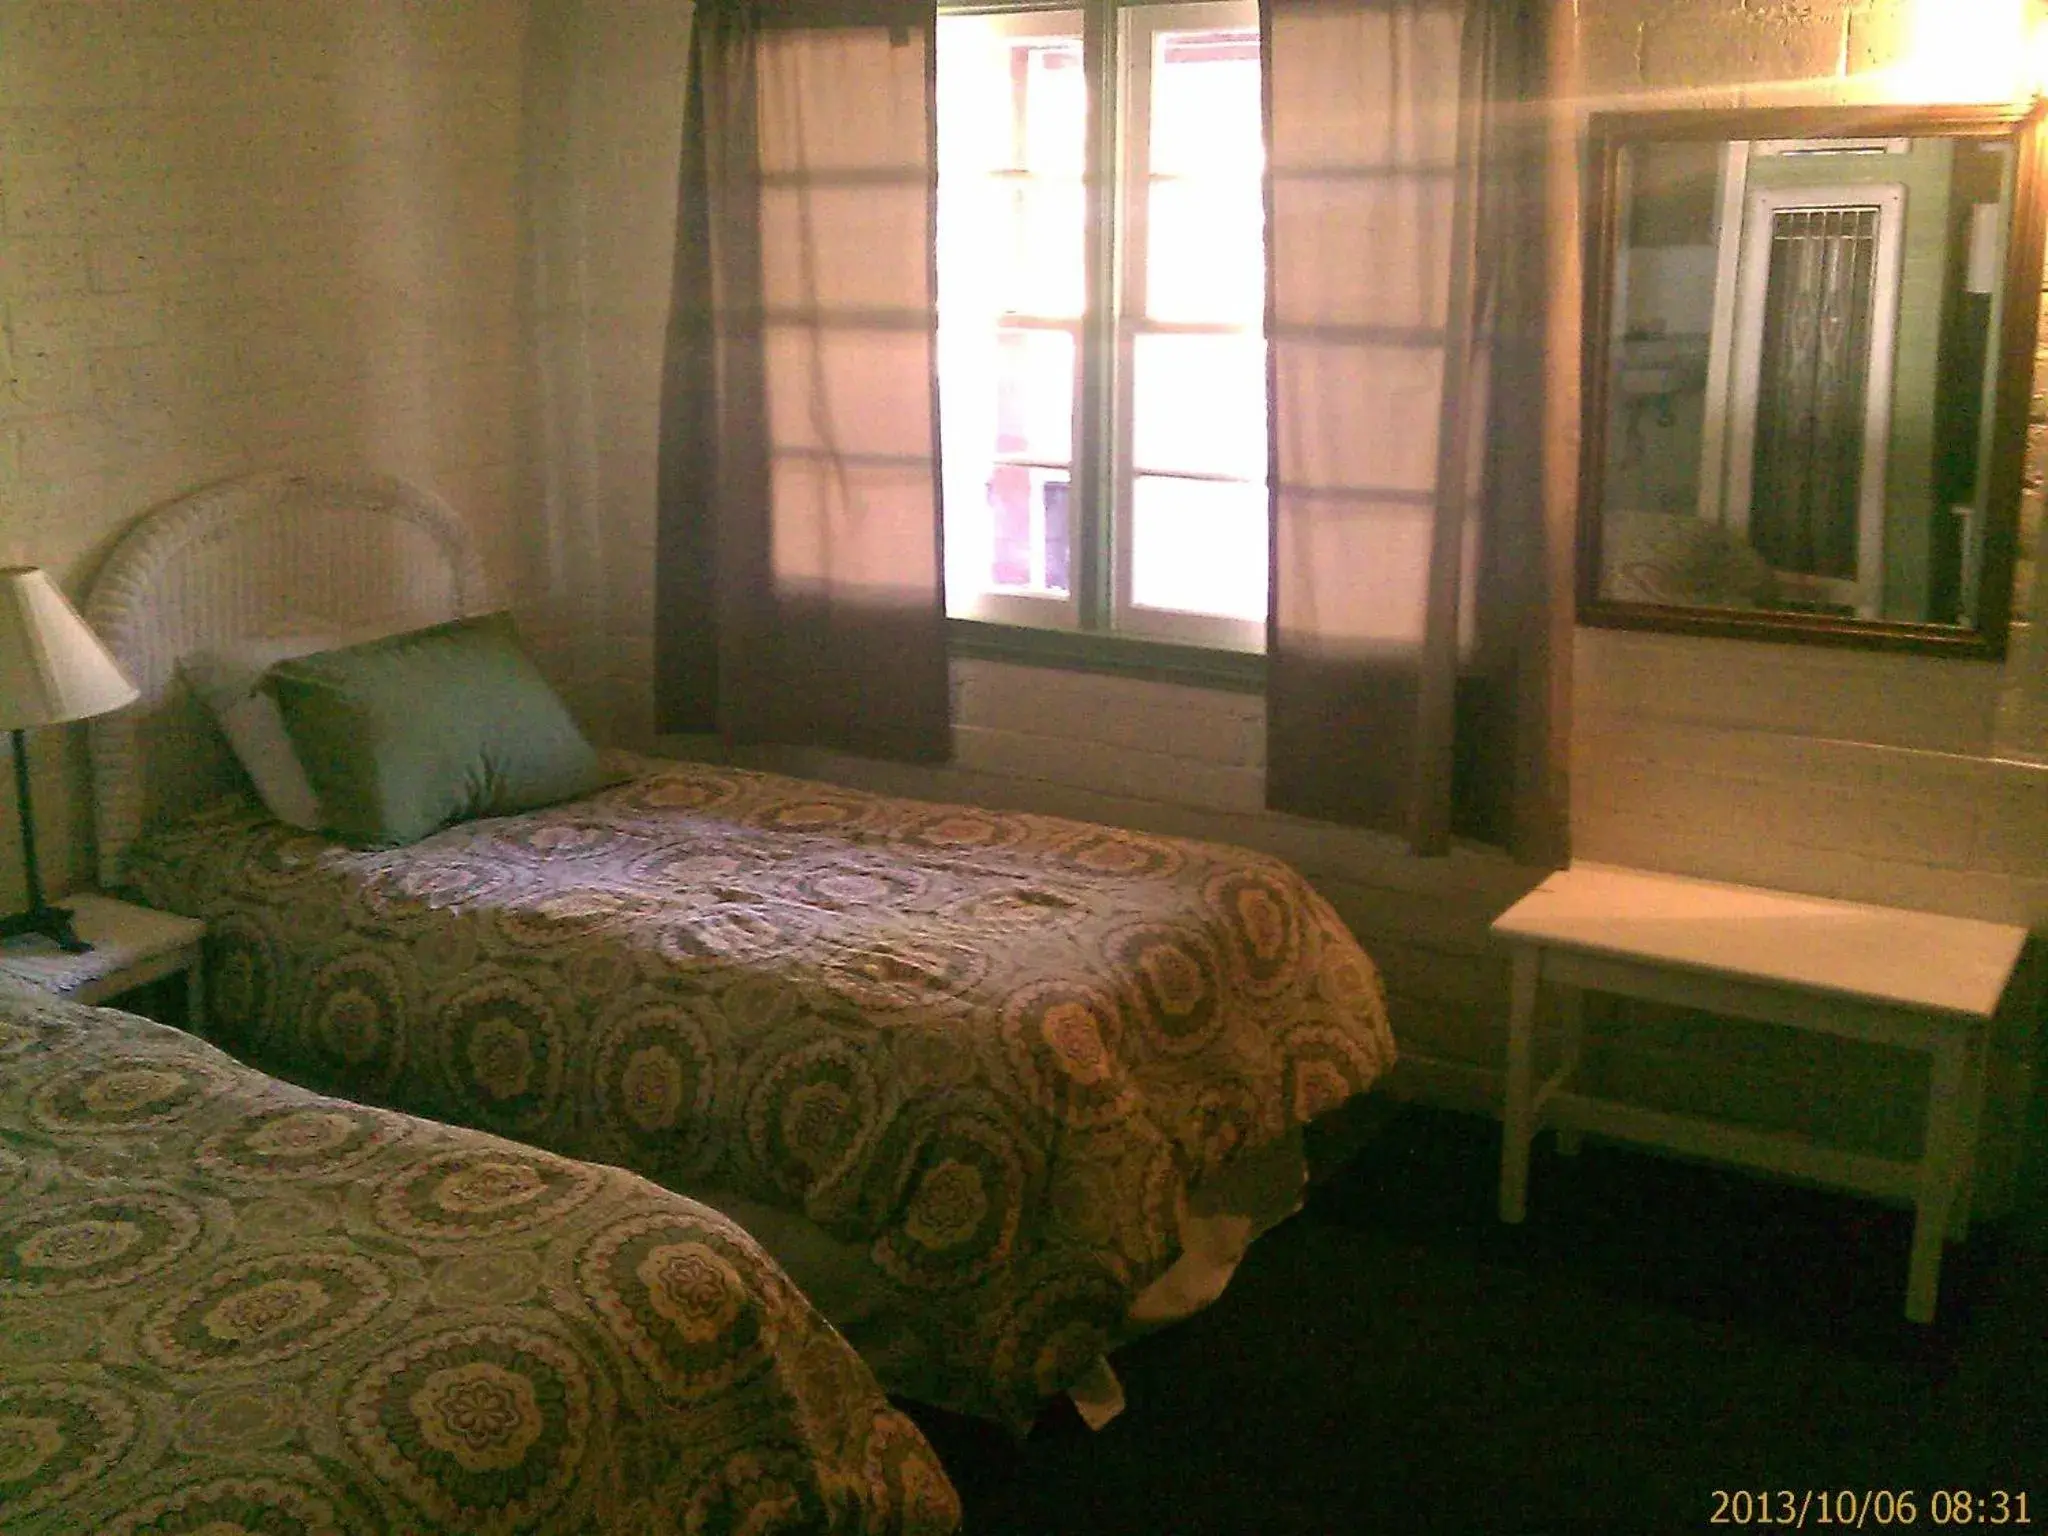 Bed in Ranch Motel